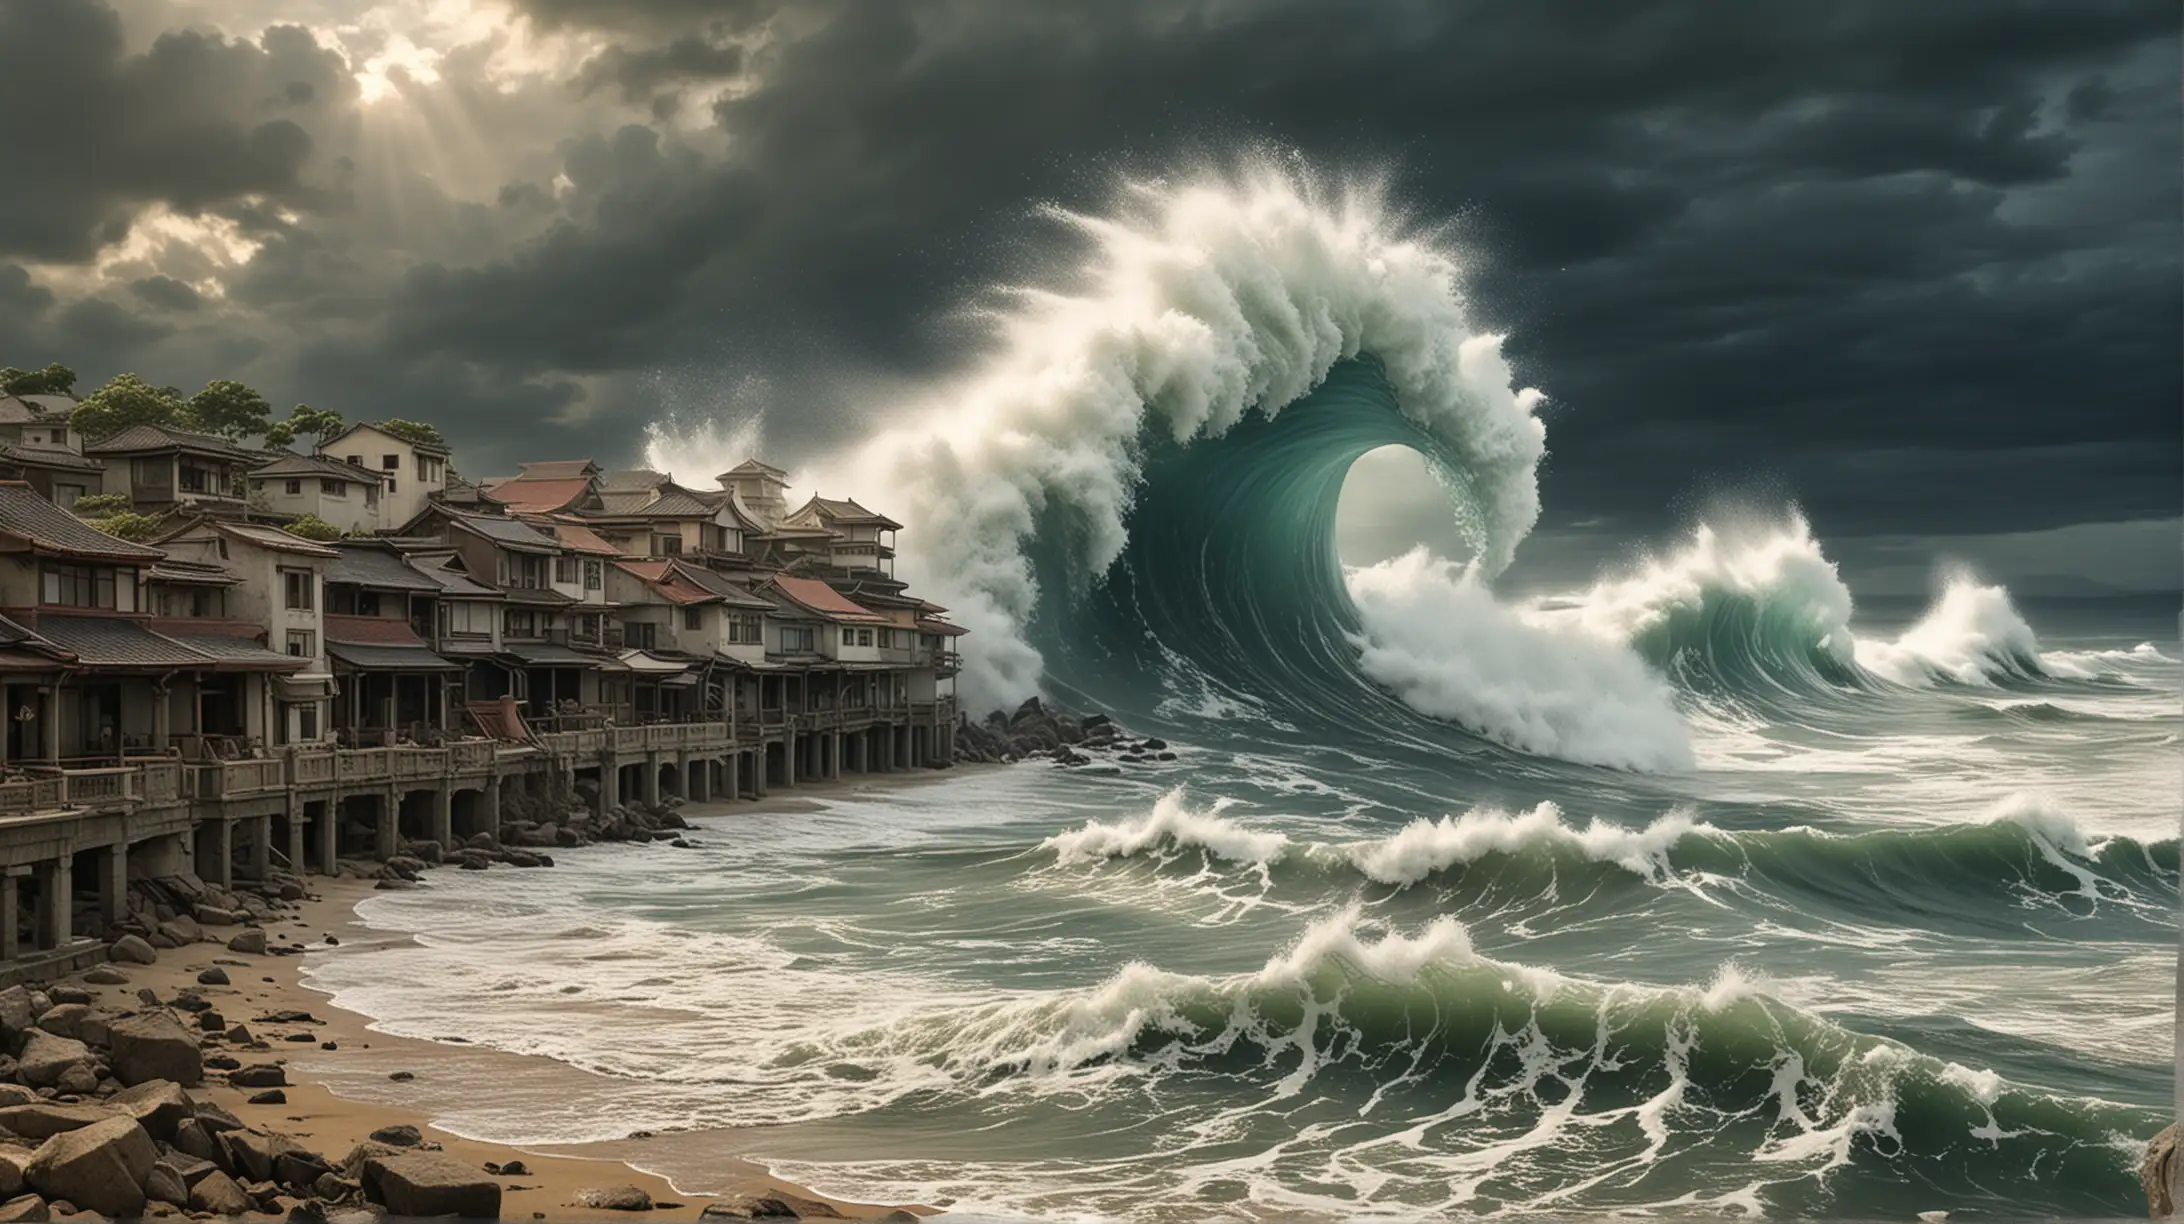 the great tsunami wave overflows an ancient city at the sea shore